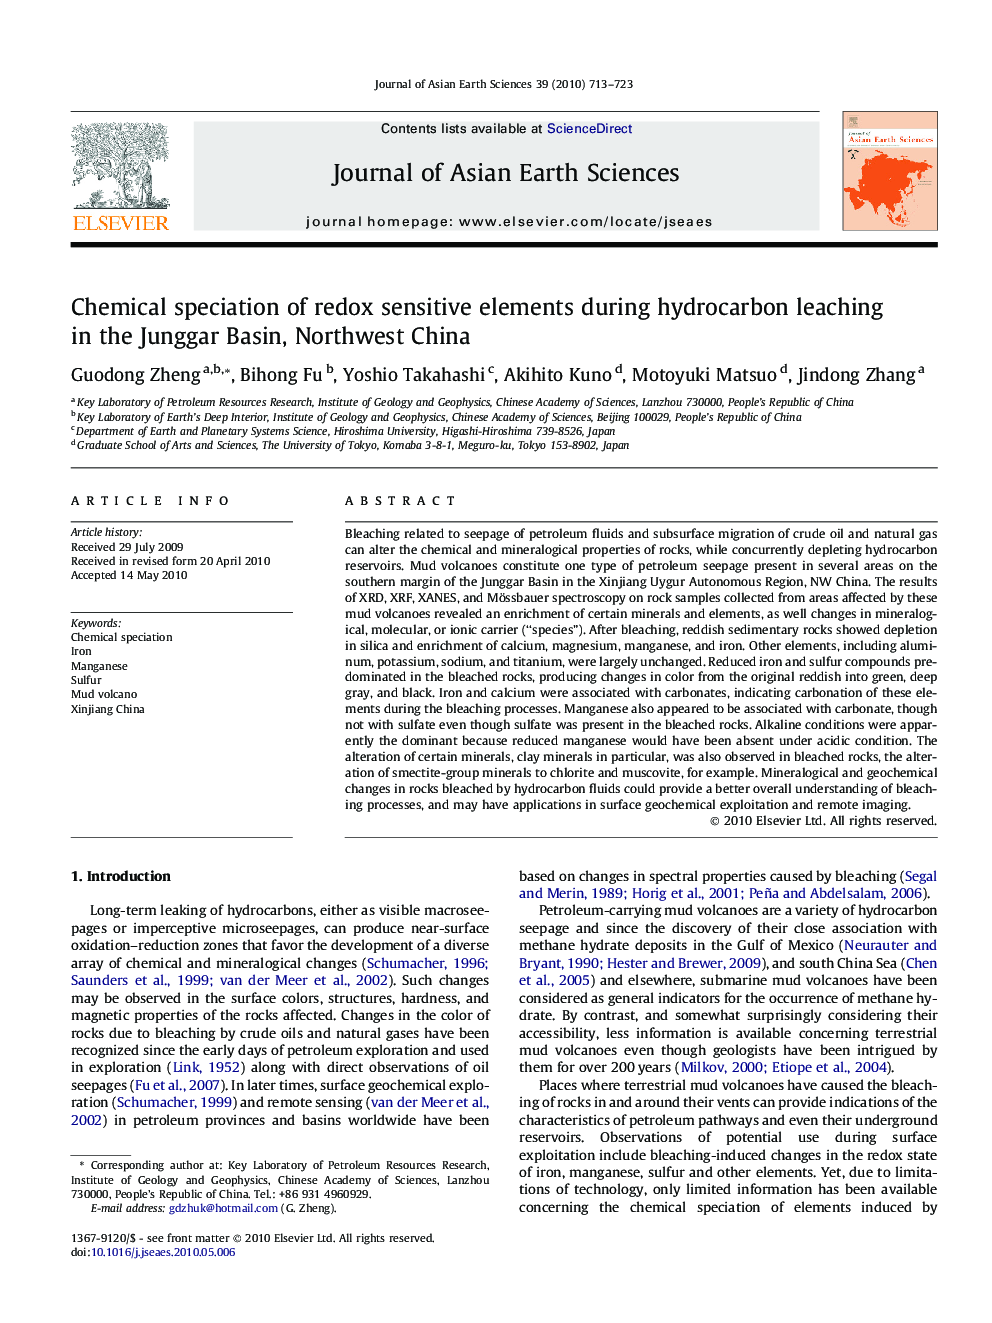 Chemical speciation of redox sensitive elements during hydrocarbon leaching in the Junggar Basin, Northwest China